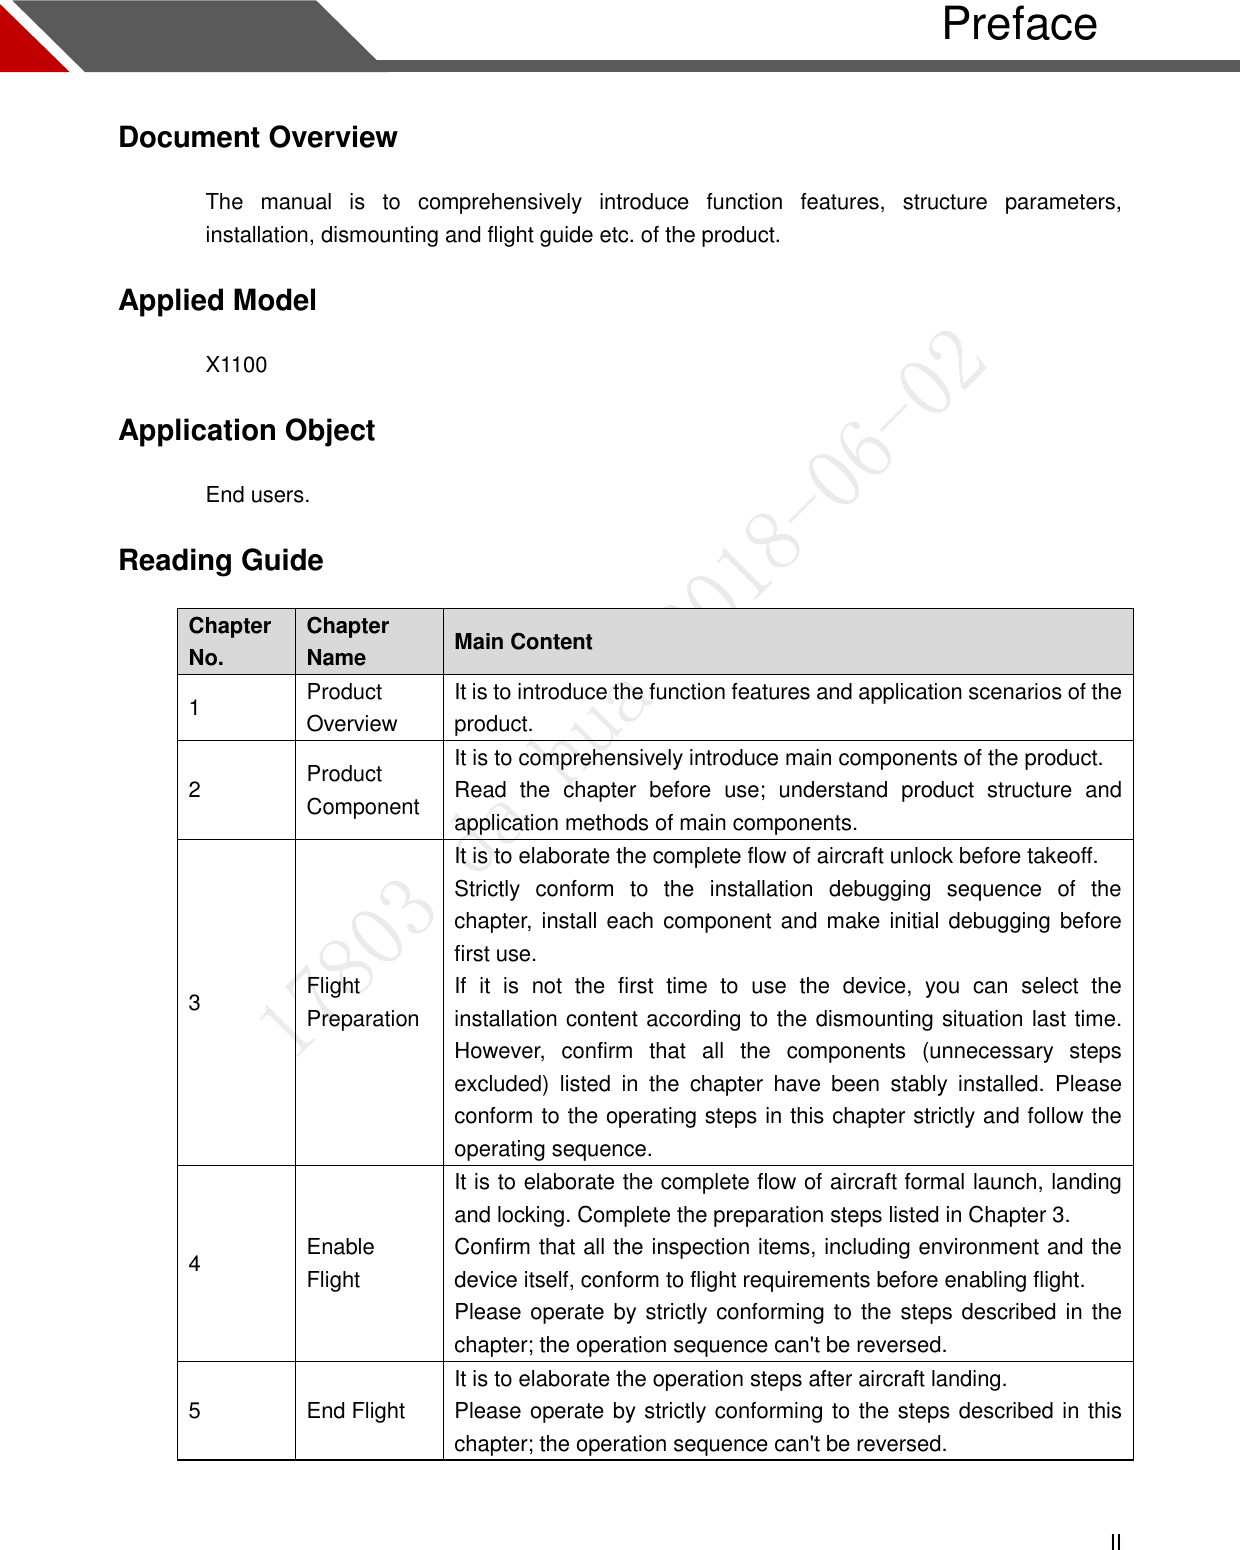  II   Preface Document Overview The  manual  is  to  comprehensively  introduce  function  features,  structure  parameters, installation, dismounting and flight guide etc. of the product. Applied Model X1100 Application Object End users. Reading Guide Chapter No. Chapter Name Main Content 1 Product Overview It is to introduce the function features and application scenarios of the product. 2 Product Component It is to comprehensively introduce main components of the product. Read  the  chapter  before  use;  understand  product  structure  and application methods of main components. 3 Flight Preparation It is to elaborate the complete flow of aircraft unlock before takeoff. Strictly  conform  to  the  installation  debugging  sequence  of  the chapter, install each component and make initial debugging before first use. If  it  is  not  the  first  time  to  use  the  device,  you  can  select  the installation content according to the dismounting situation last time. However,  confirm  that  all  the  components  (unnecessary  steps excluded)  listed  in  the  chapter  have  been  stably  installed.  Please conform to the operating steps in this chapter strictly and follow the operating sequence. 4 Enable Flight It is to elaborate the complete flow of aircraft formal launch, landing and locking. Complete the preparation steps listed in Chapter 3. Confirm that all the inspection items, including environment and the device itself, conform to flight requirements before enabling flight. Please operate by strictly conforming to the steps described in the chapter; the operation sequence can&apos;t be reversed. 5 End Flight It is to elaborate the operation steps after aircraft landing. Please operate by strictly conforming to the steps described in this chapter; the operation sequence can&apos;t be reversed.  